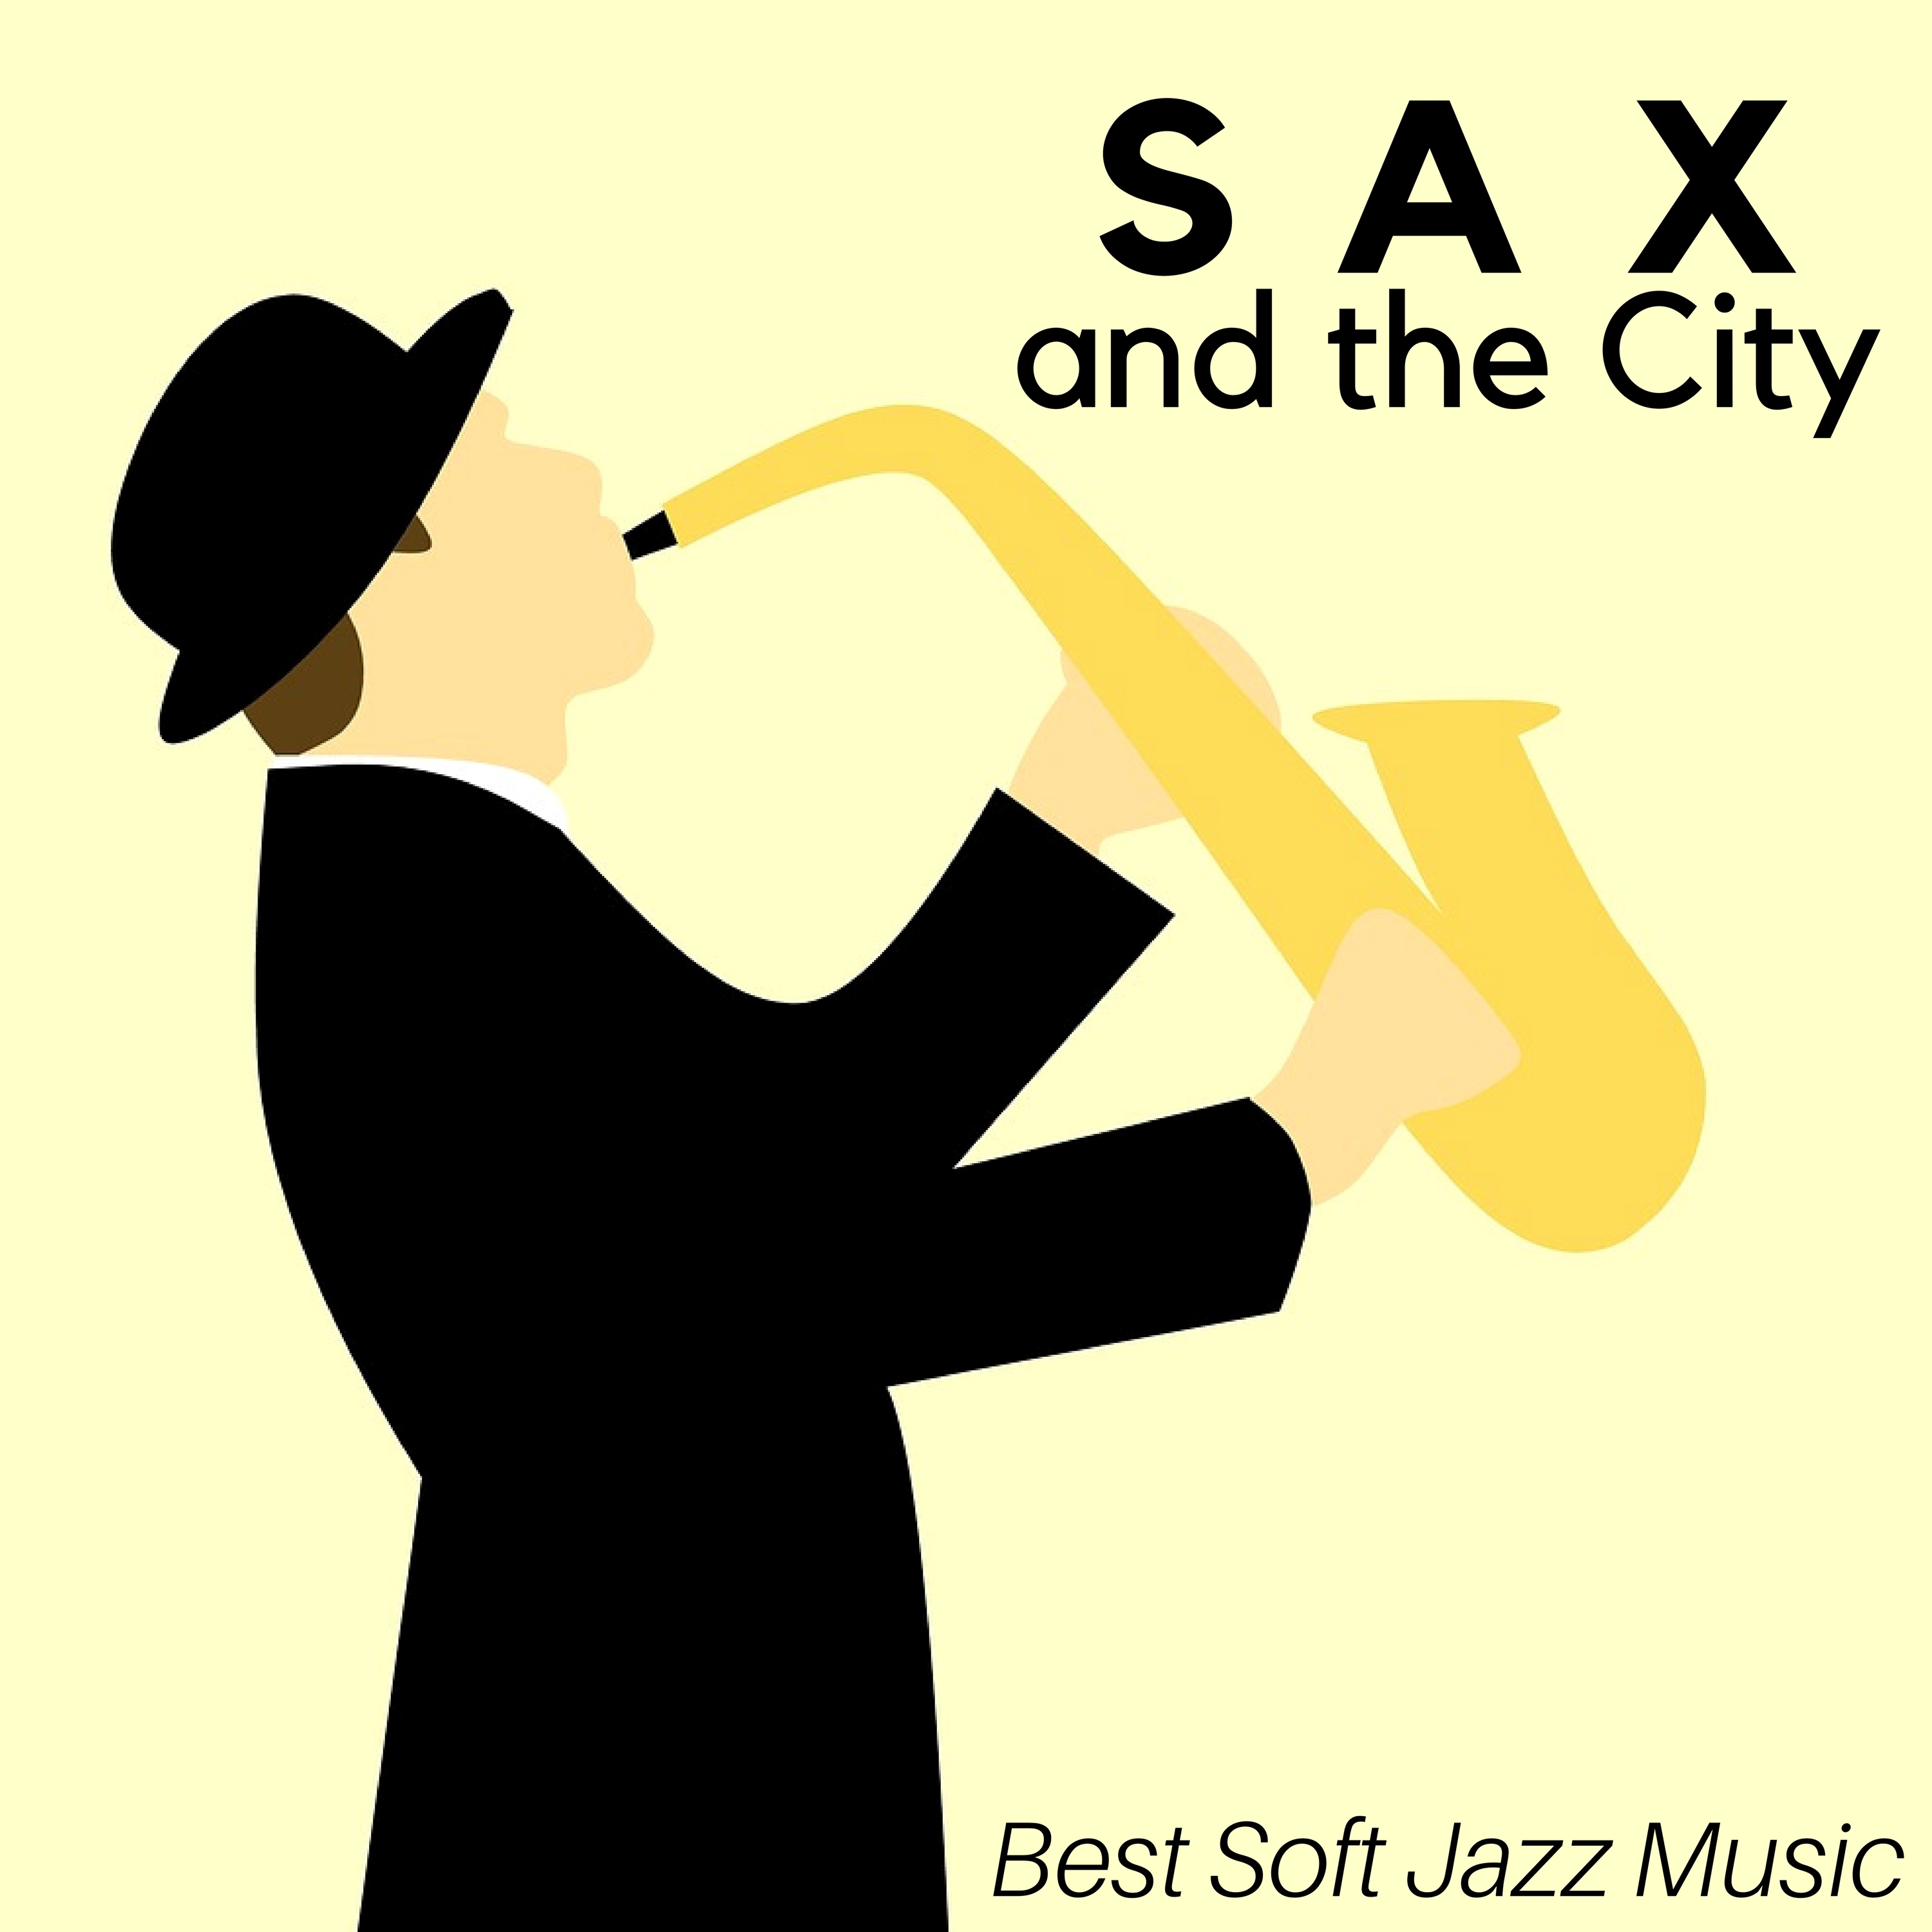 Sax and the City - your Go-To Album of the Best Soft Jazz Music, Chillout Vibes, Smooth Jazz, Acid Jazz, Nu Jazz and Romantic Ambient Music for Special Nights